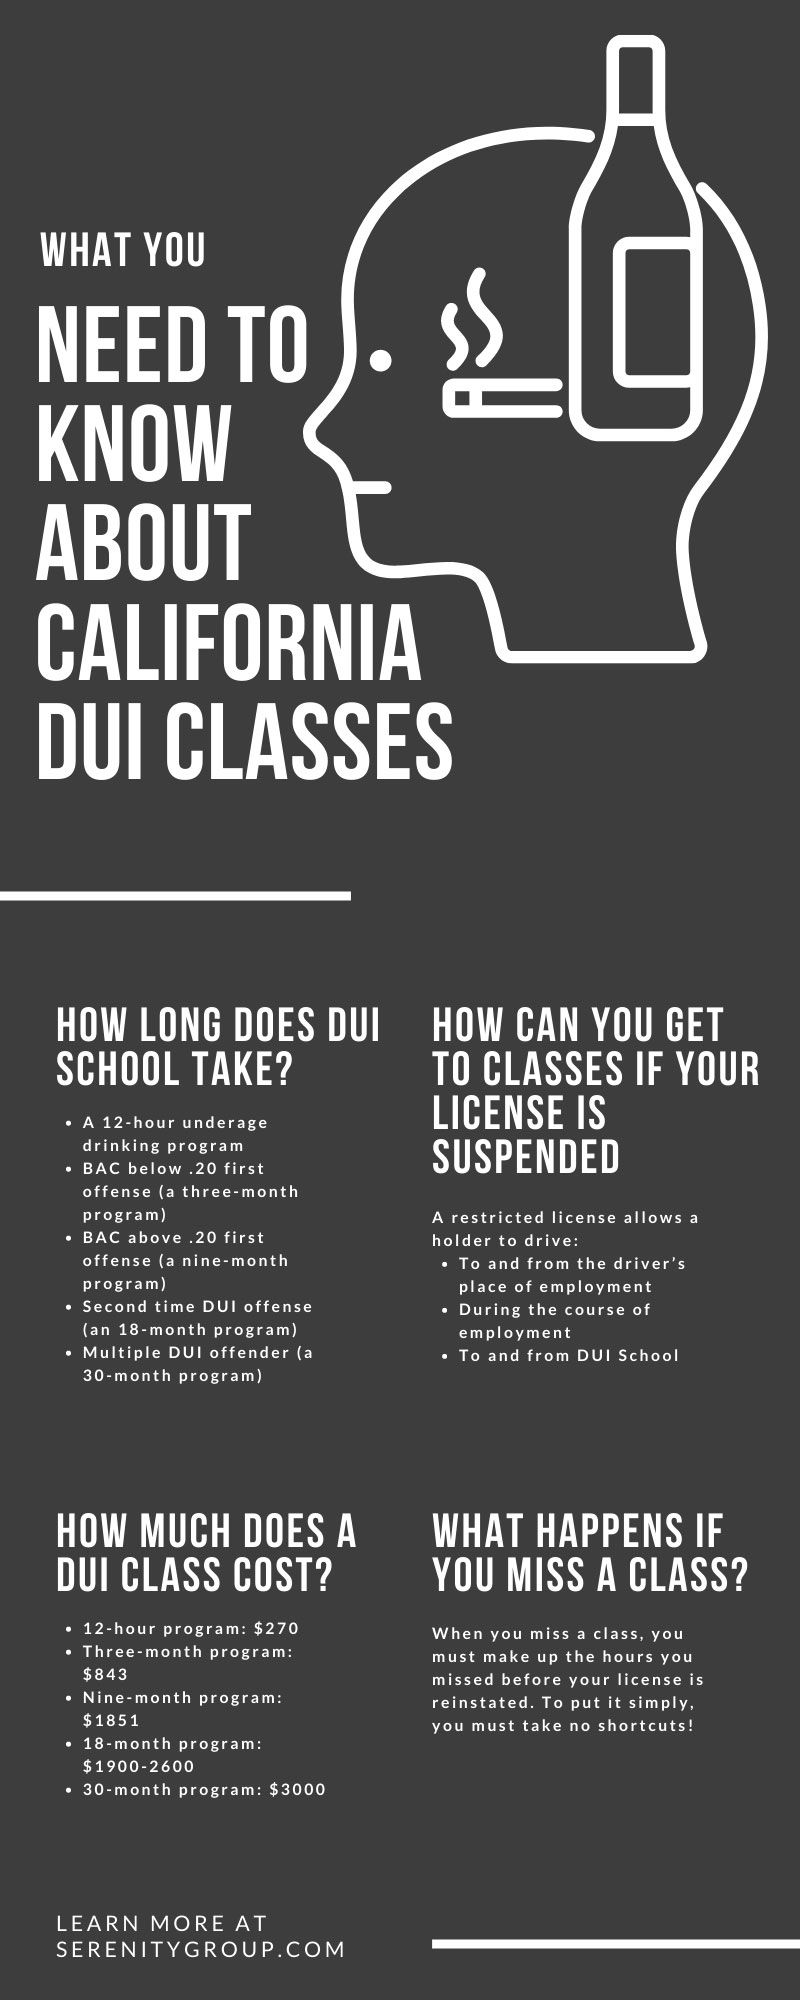 What You Need To Know About California DUI Classes